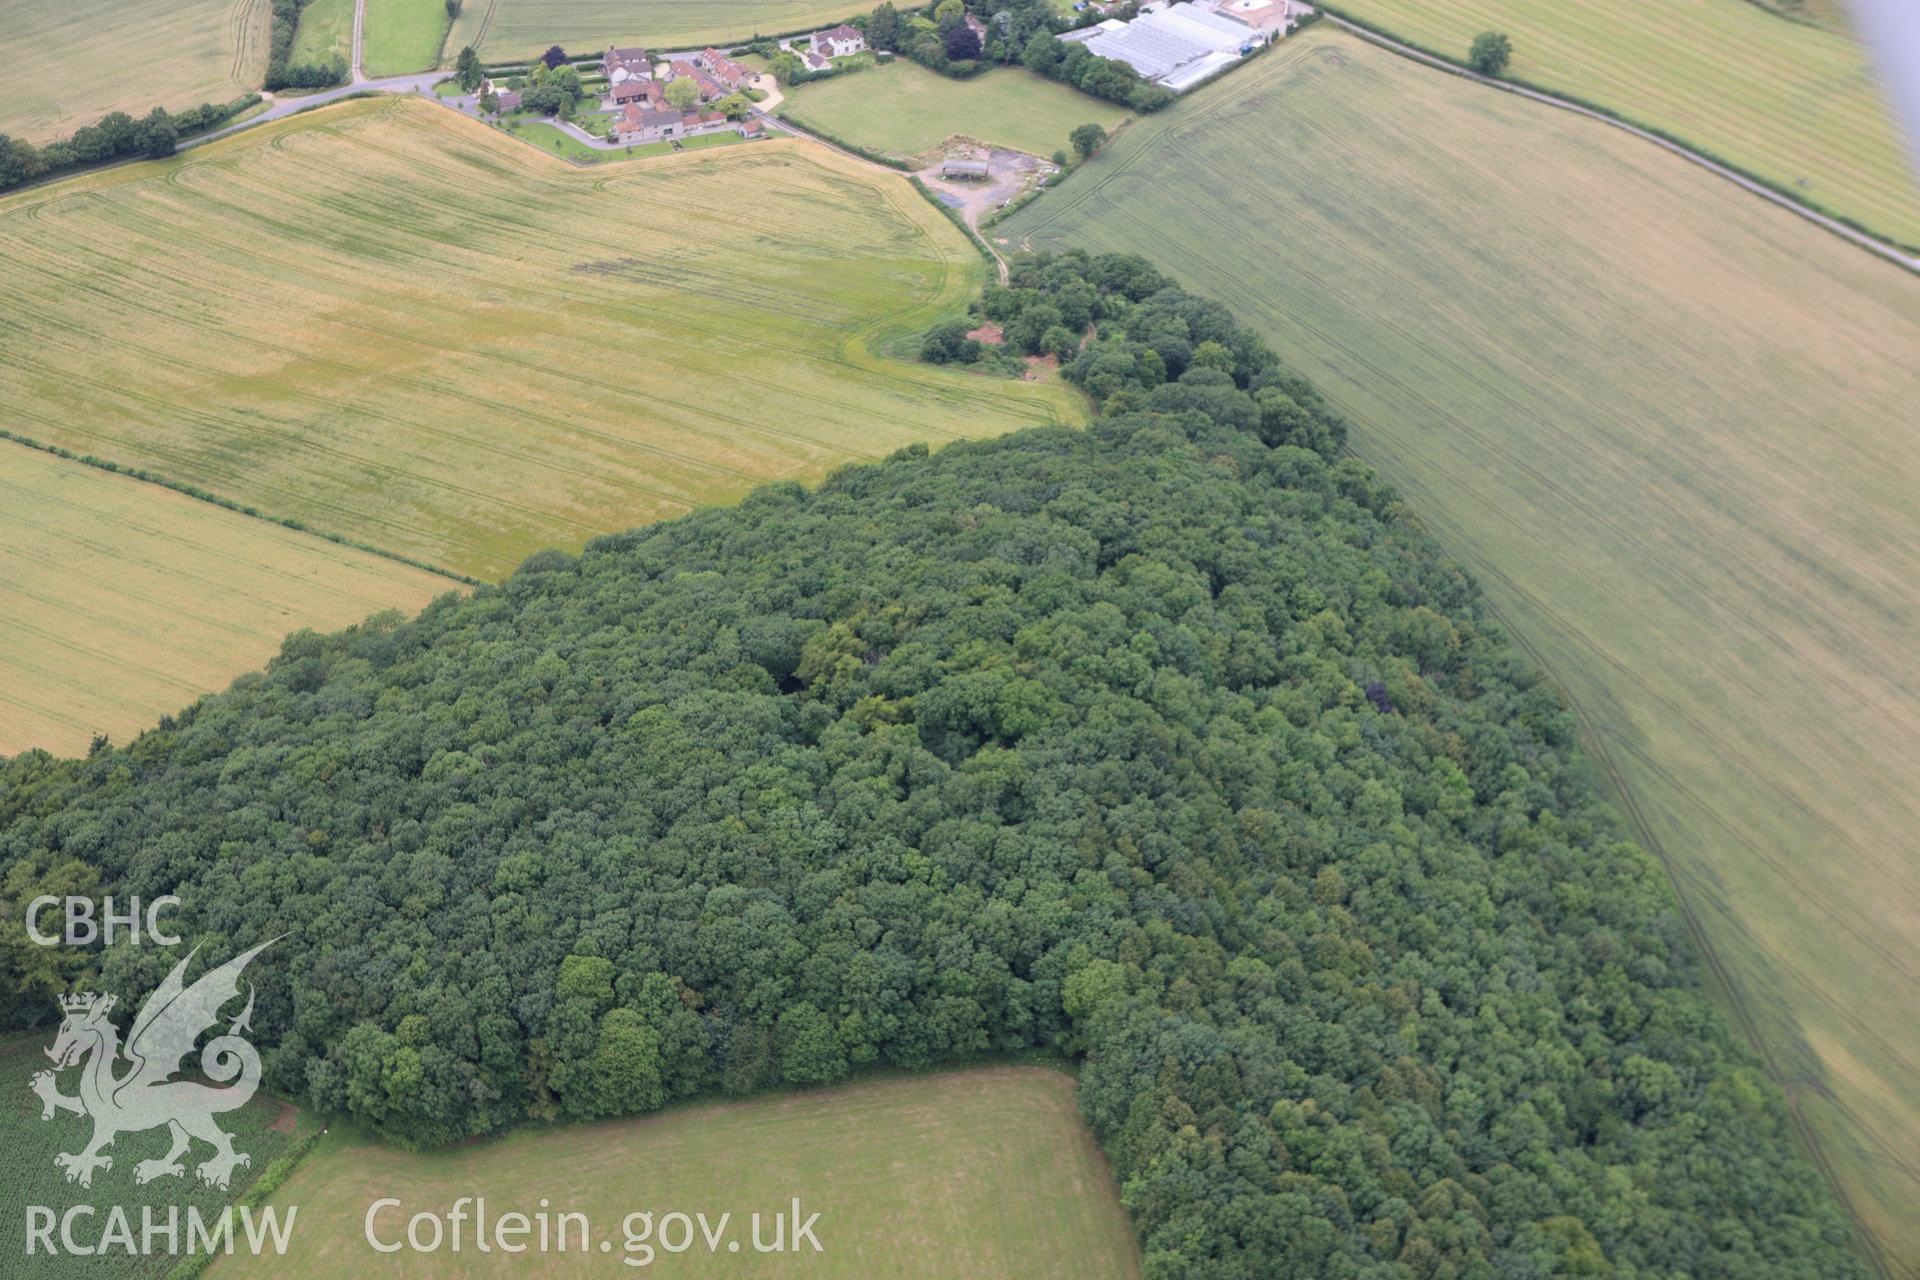 RCAHMW colour oblique aerial photograph of The Larches Defended Enclosure. Taken on 09 July 2009 by Toby Driver